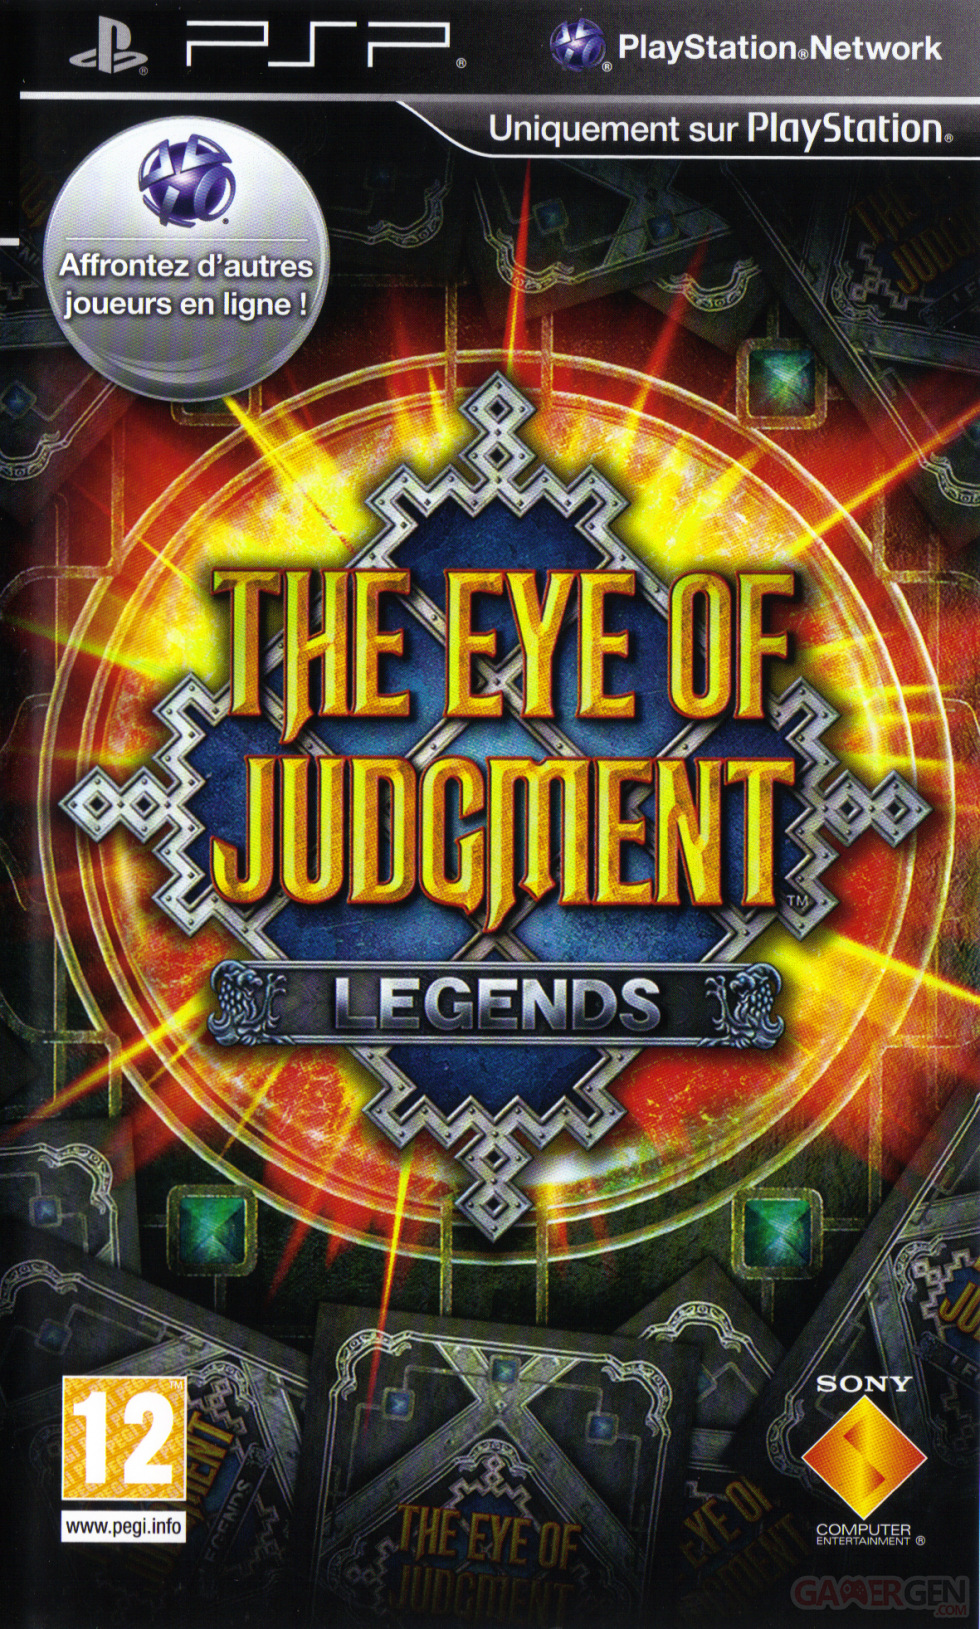 The-eye-of-judgement-front-cover-PSP